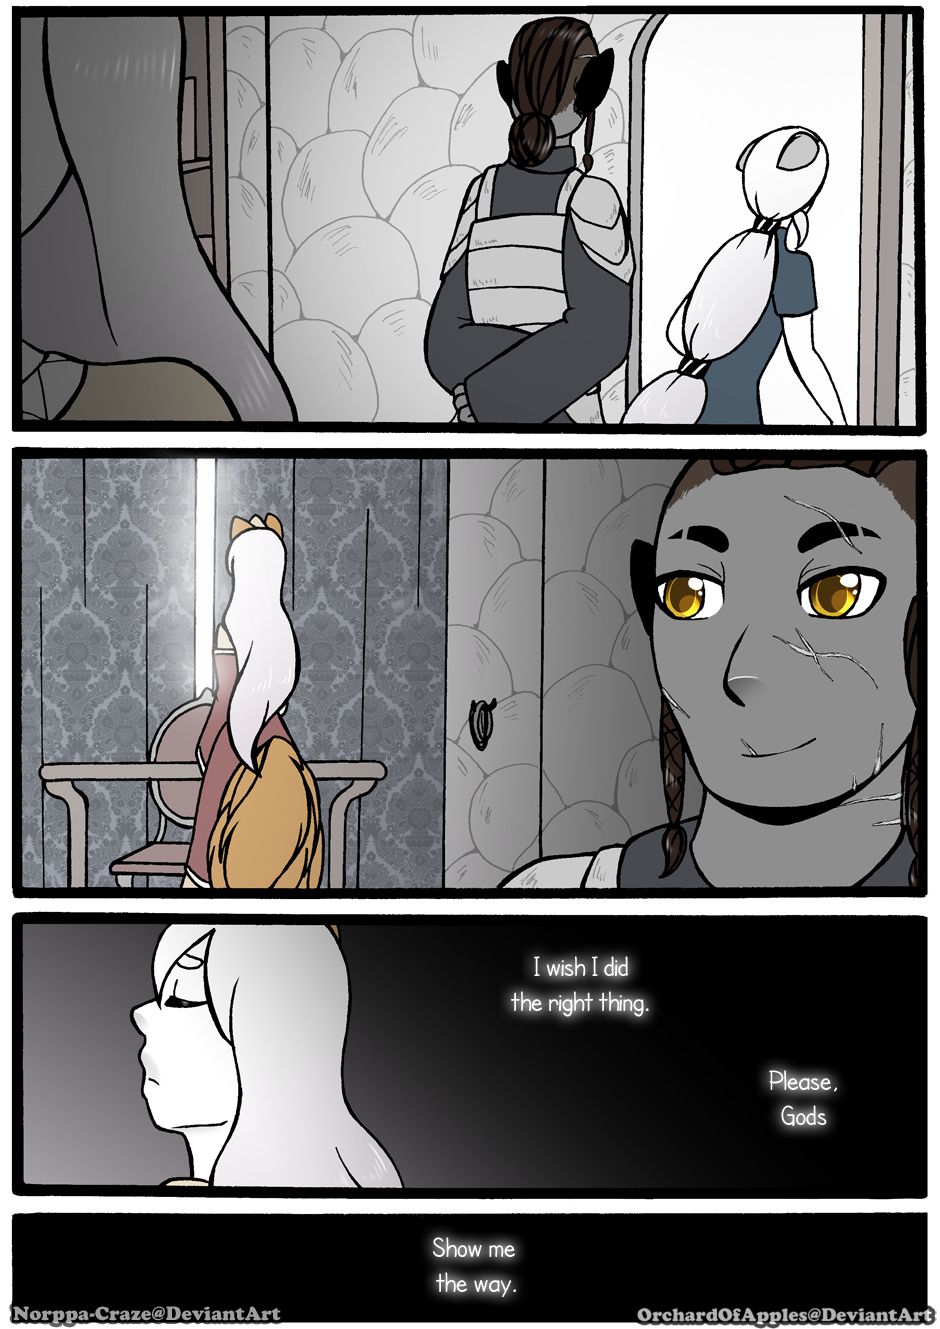 [Jeny-jen94] Between Kings and Queens [Ongoing] 284